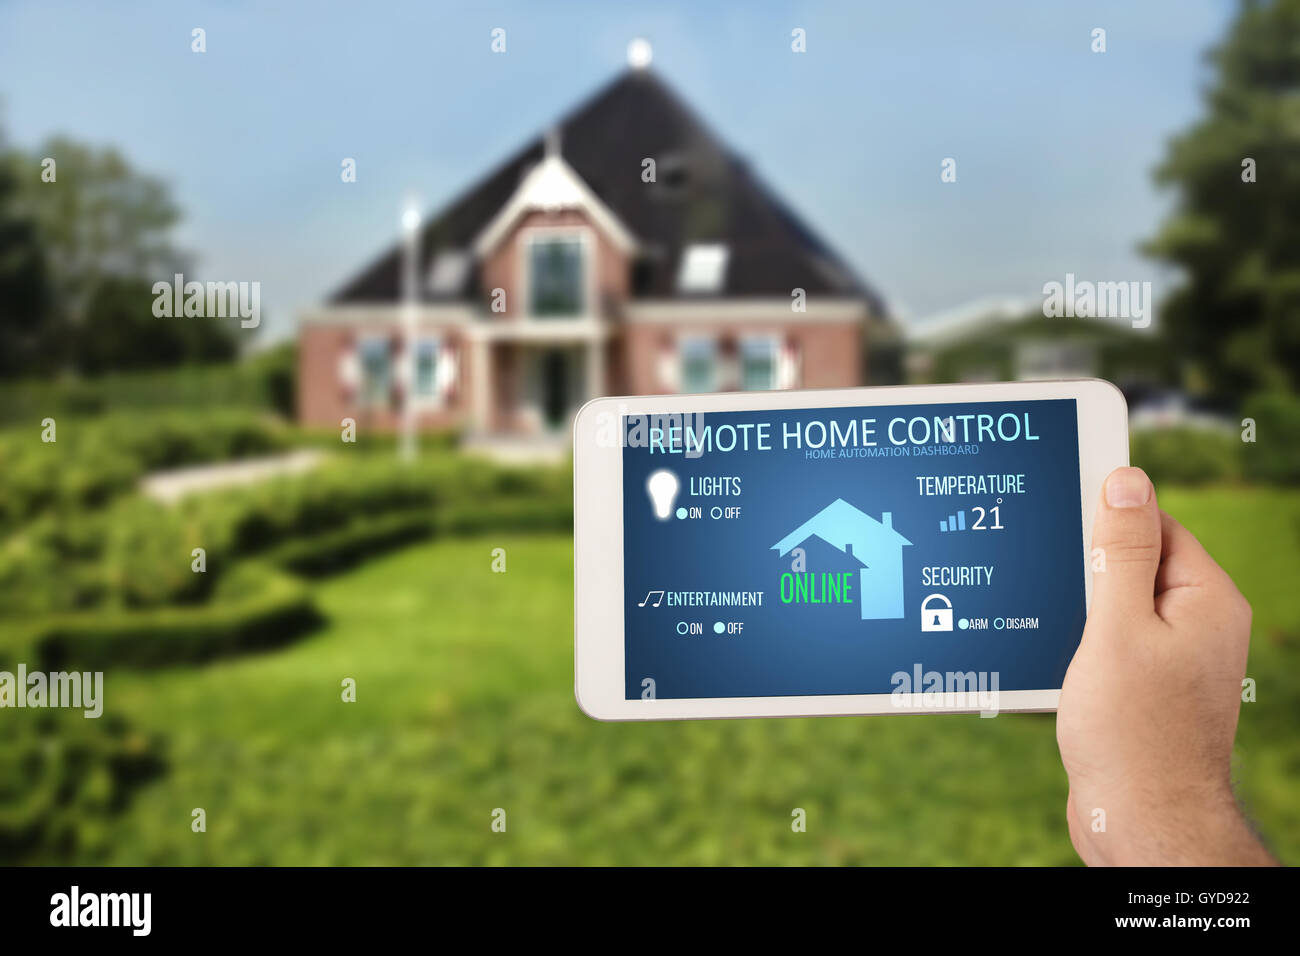 Remote home control system on a digital tablet. Stock Photo